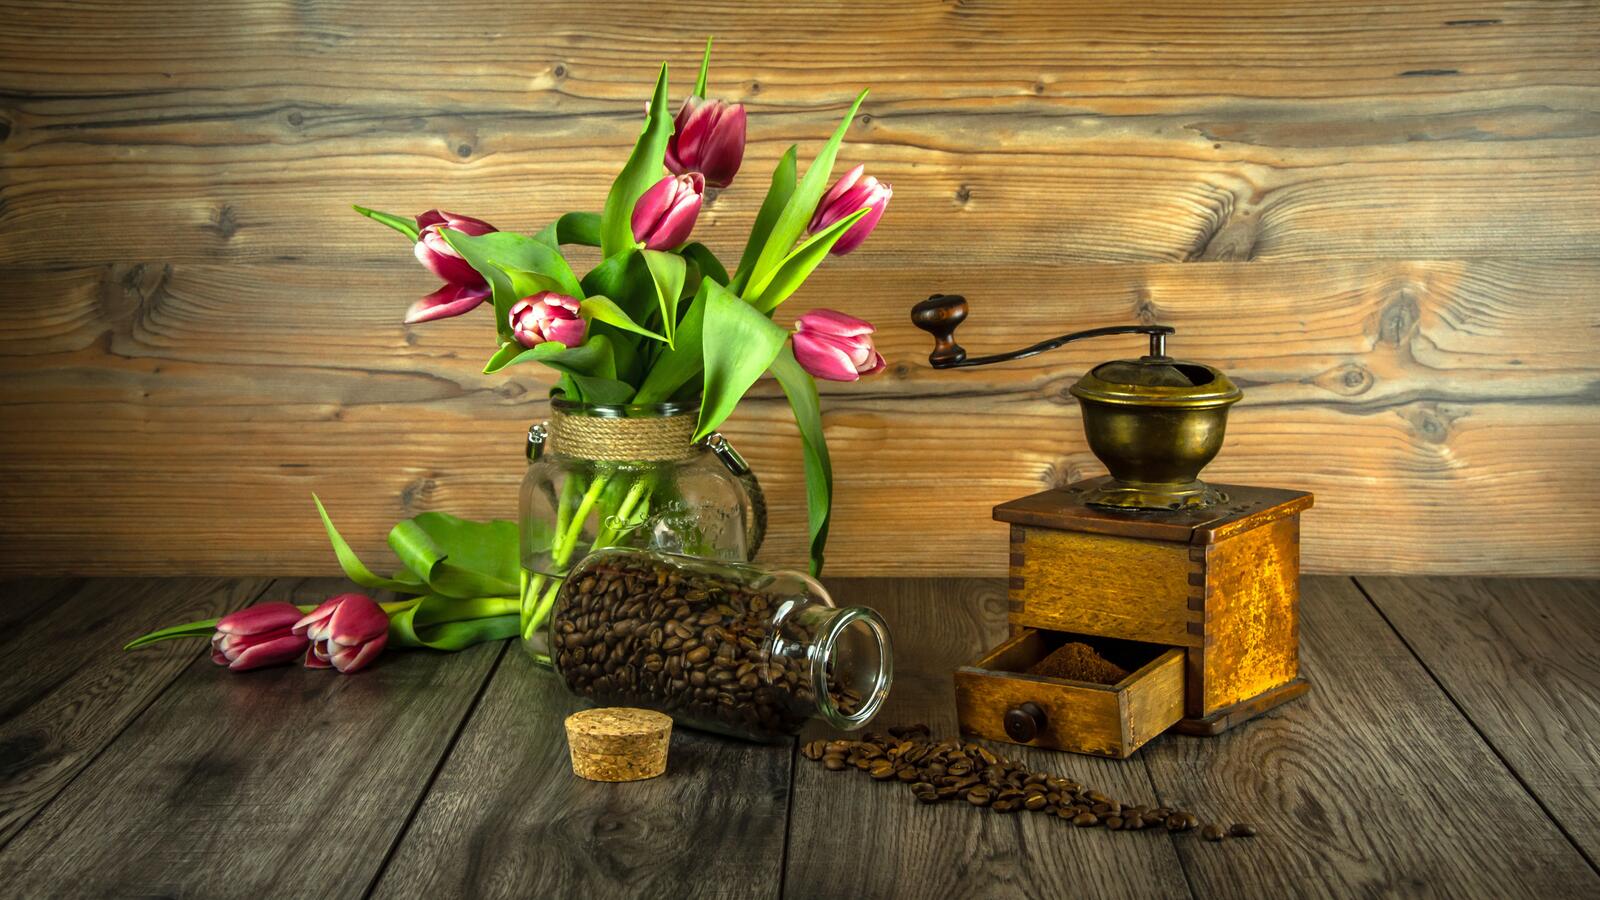 Wallpapers vase tulips table on the desktop